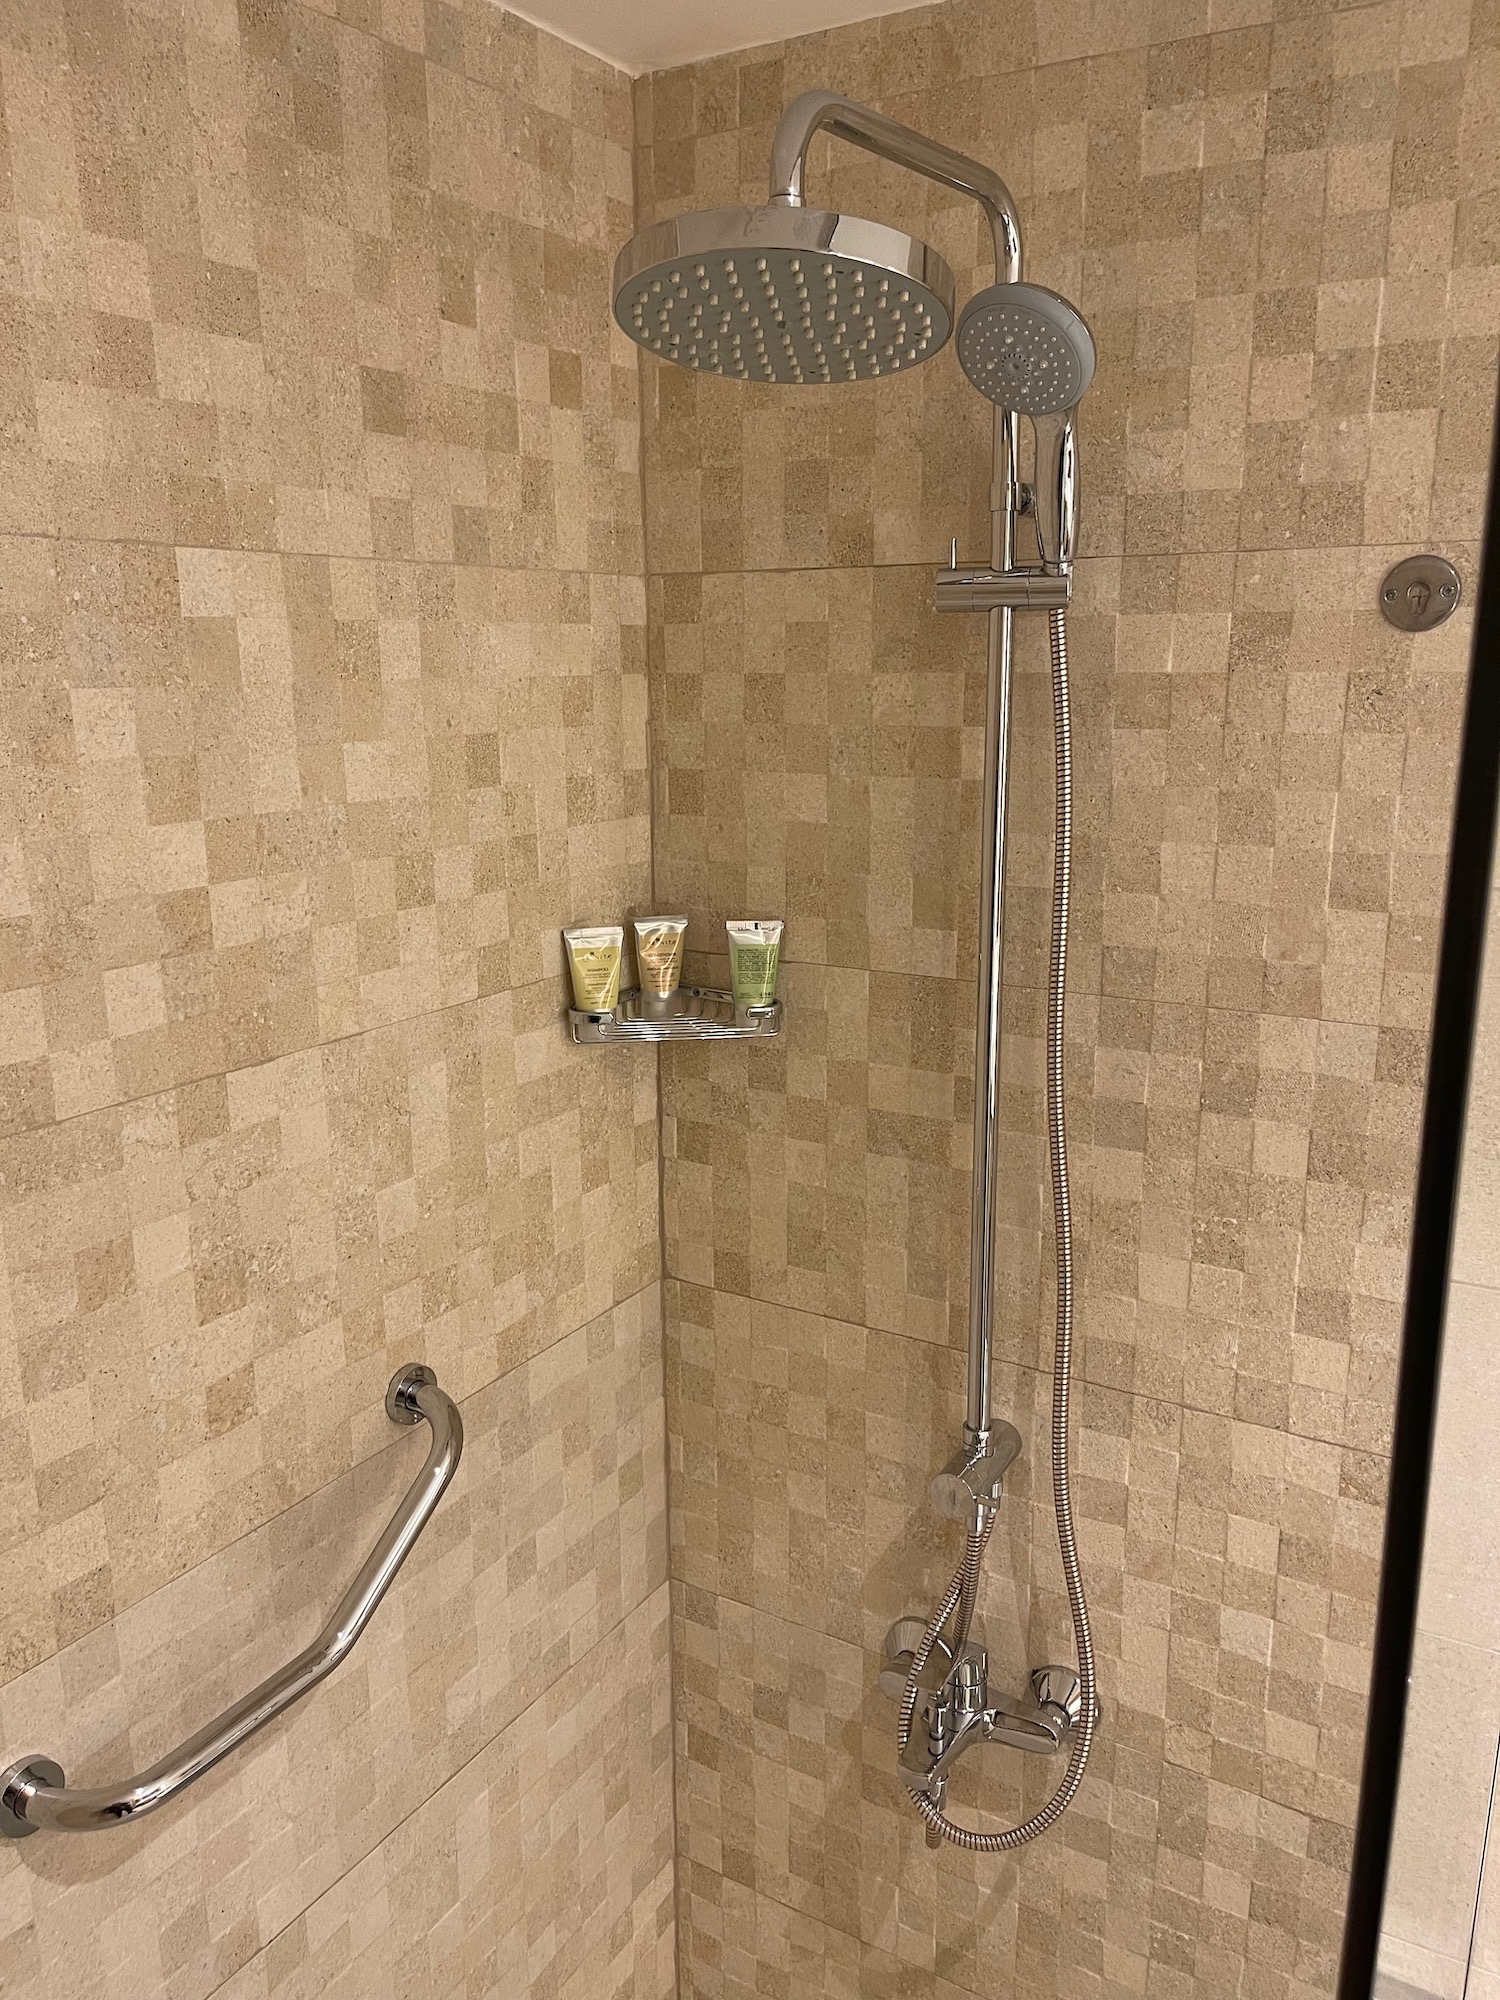 a shower head and handrail in a bathroom